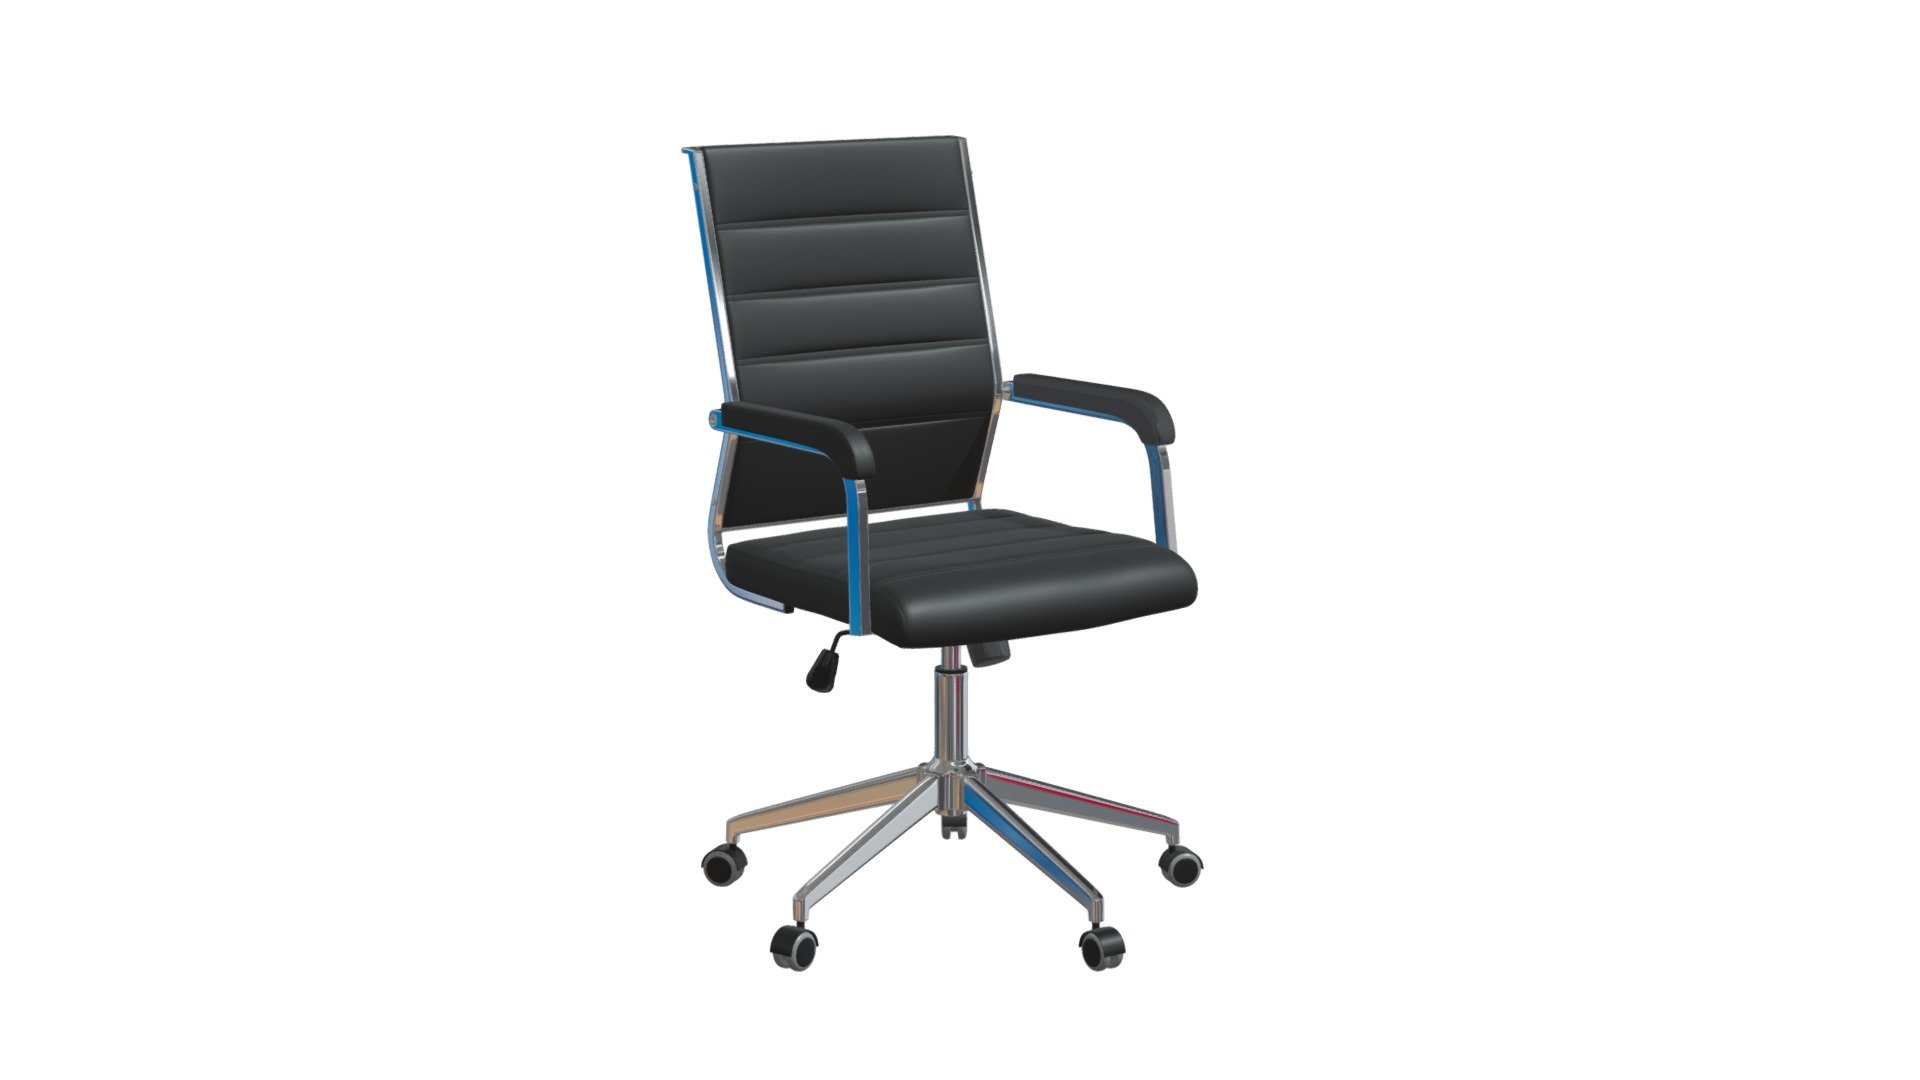 https://zuomod.com/liderato-office-chair-black

The Liderato Office Chair has mid century modern urban lines and looks great in any space. With a heavy duty vinyl covering and a sturdy steel frame, this chair fits in any dining room, home office, or even as a bedroom accent chair. The frame and base are chrome plated for a sleek modern look 3d model